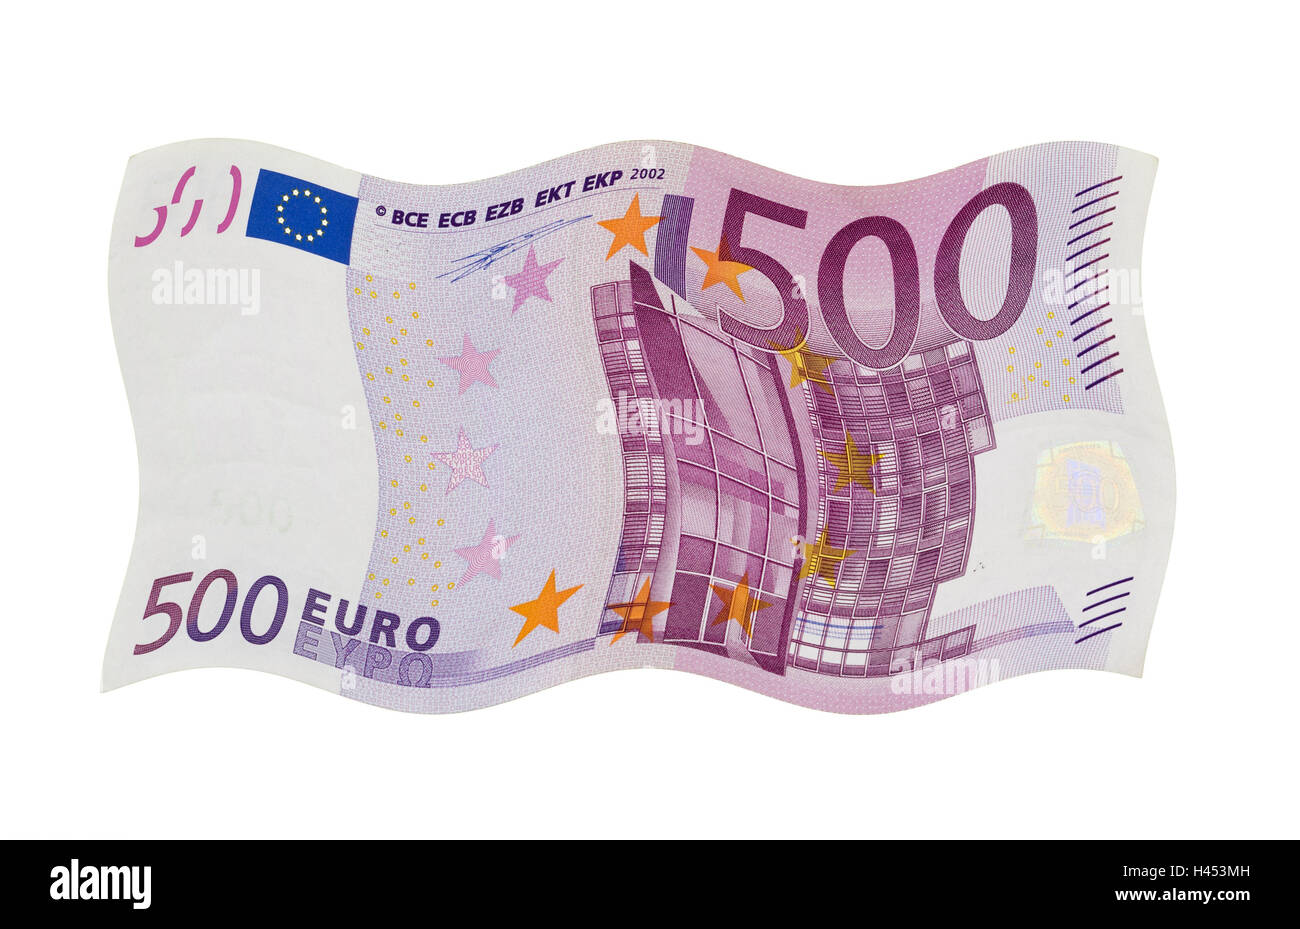 Fünfhundert euro banknote, distorts, corrugatedly, 500, 500, money, cash, light, banknote, euro, eurolight, foreign currency, save, savings, saved, studio, product photography, cut out, Stock Photo